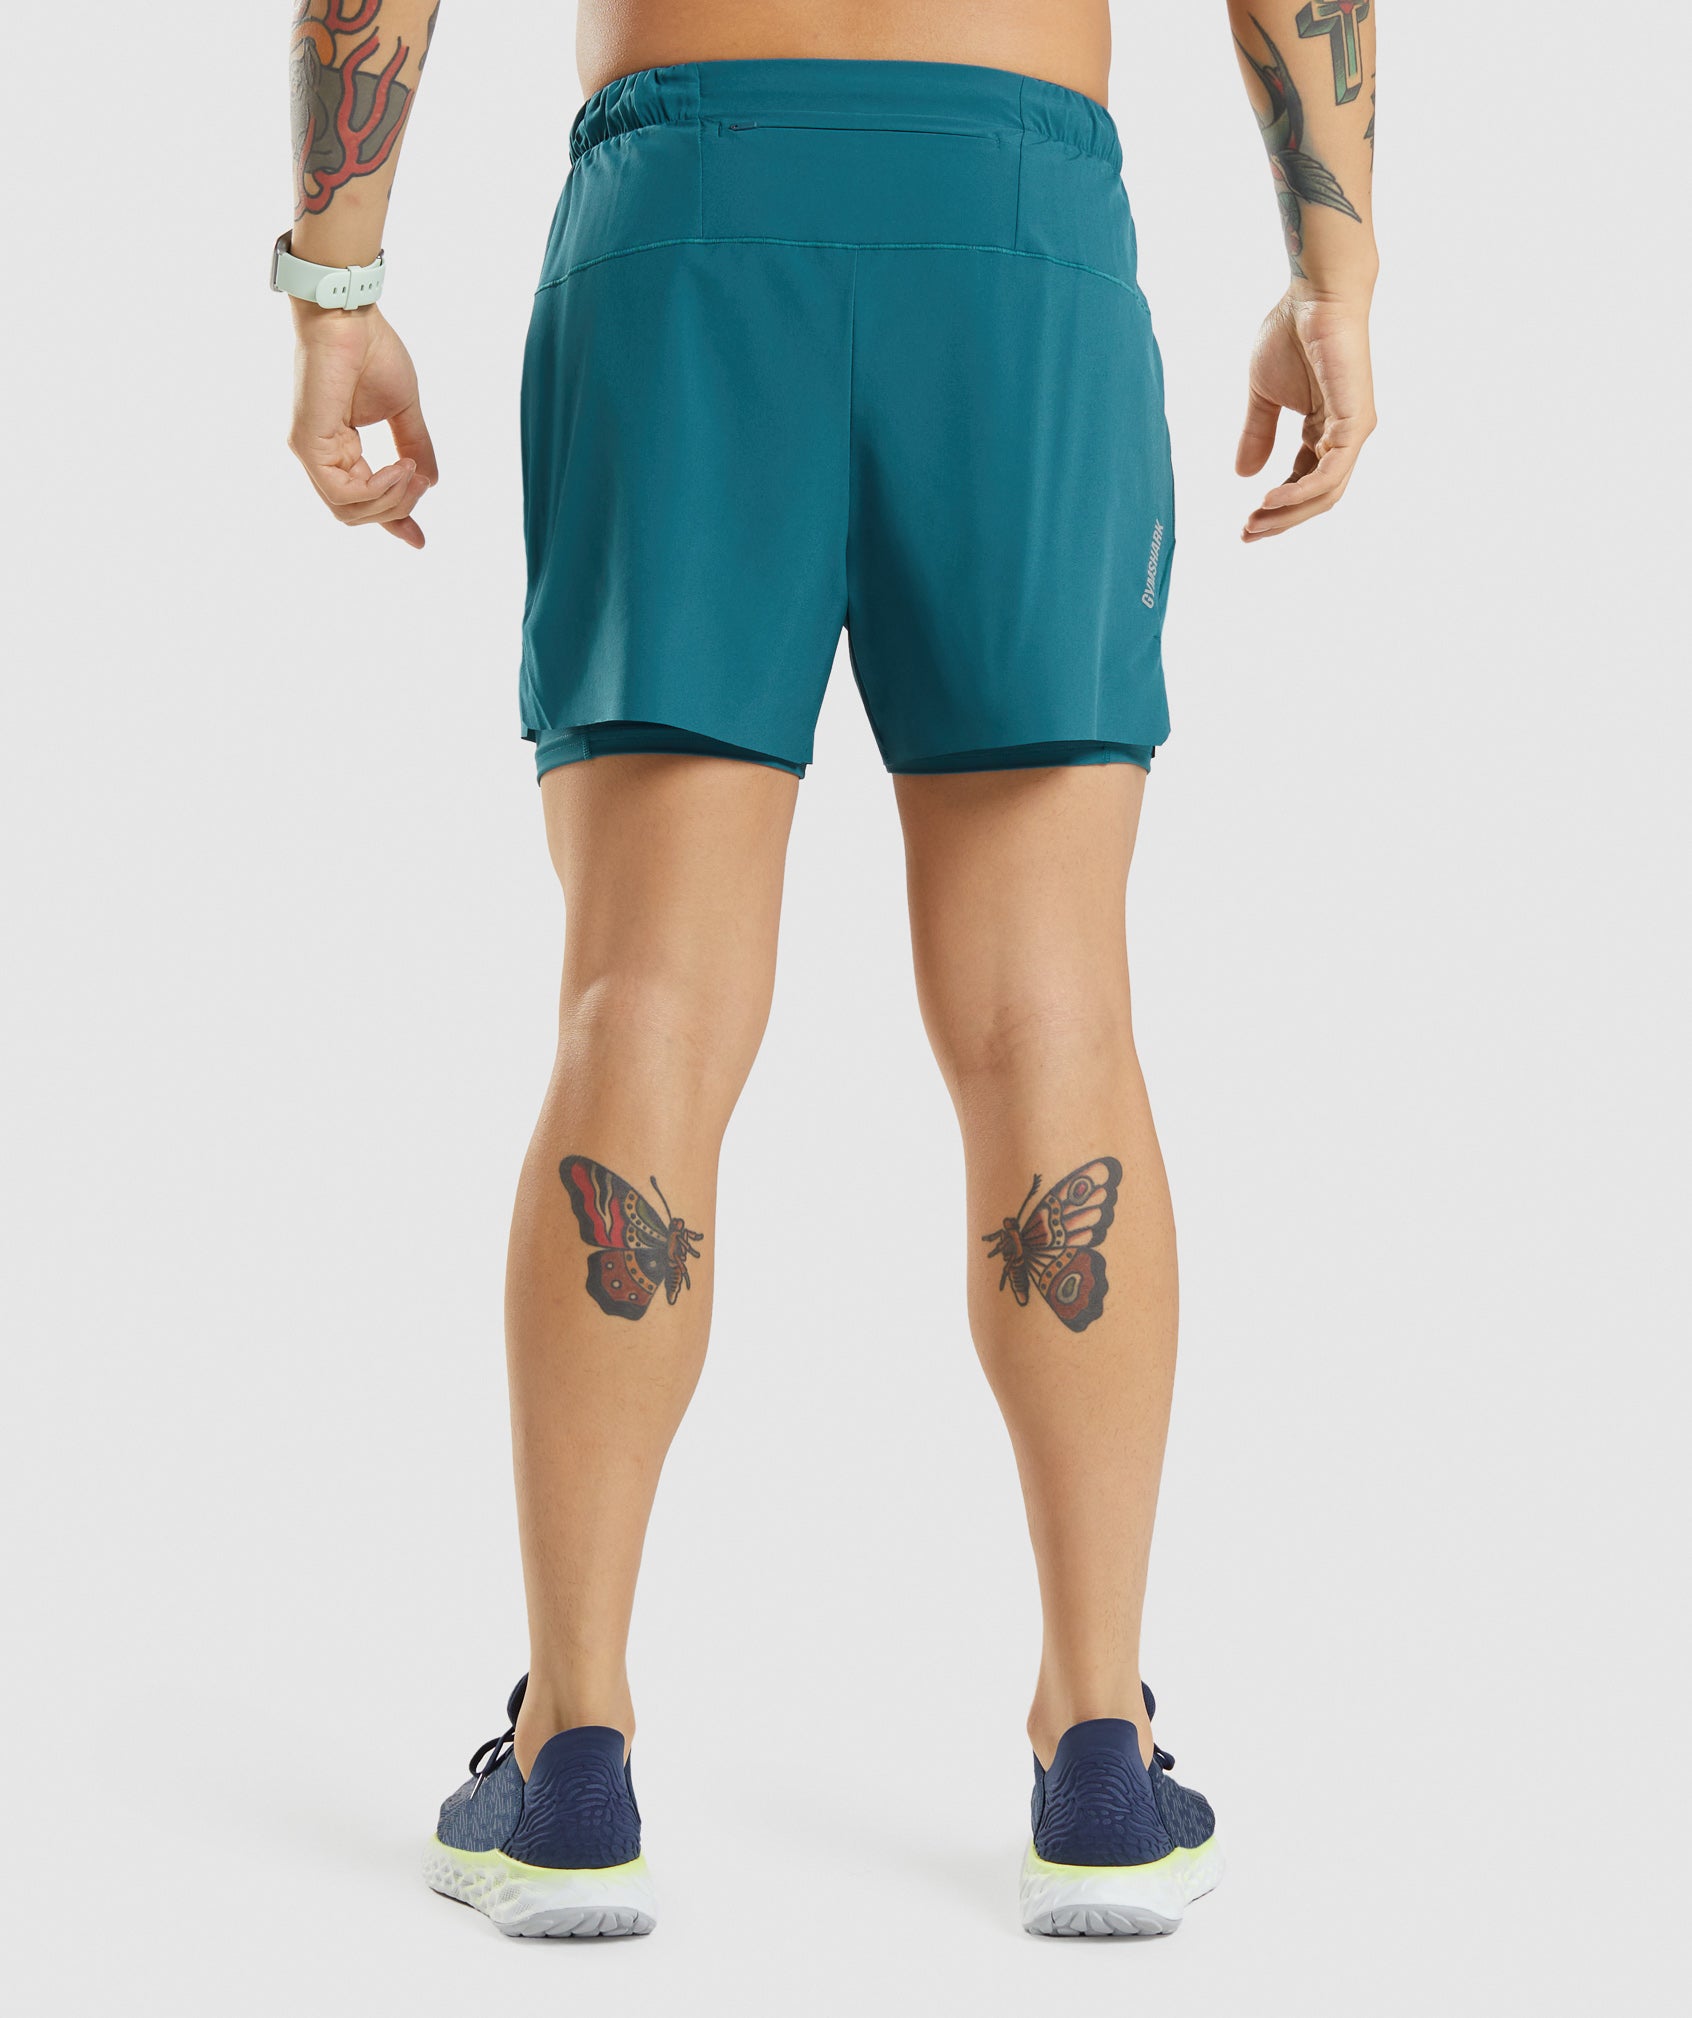 Speed 5" 2 in 1 Shorts in Teal - view 2